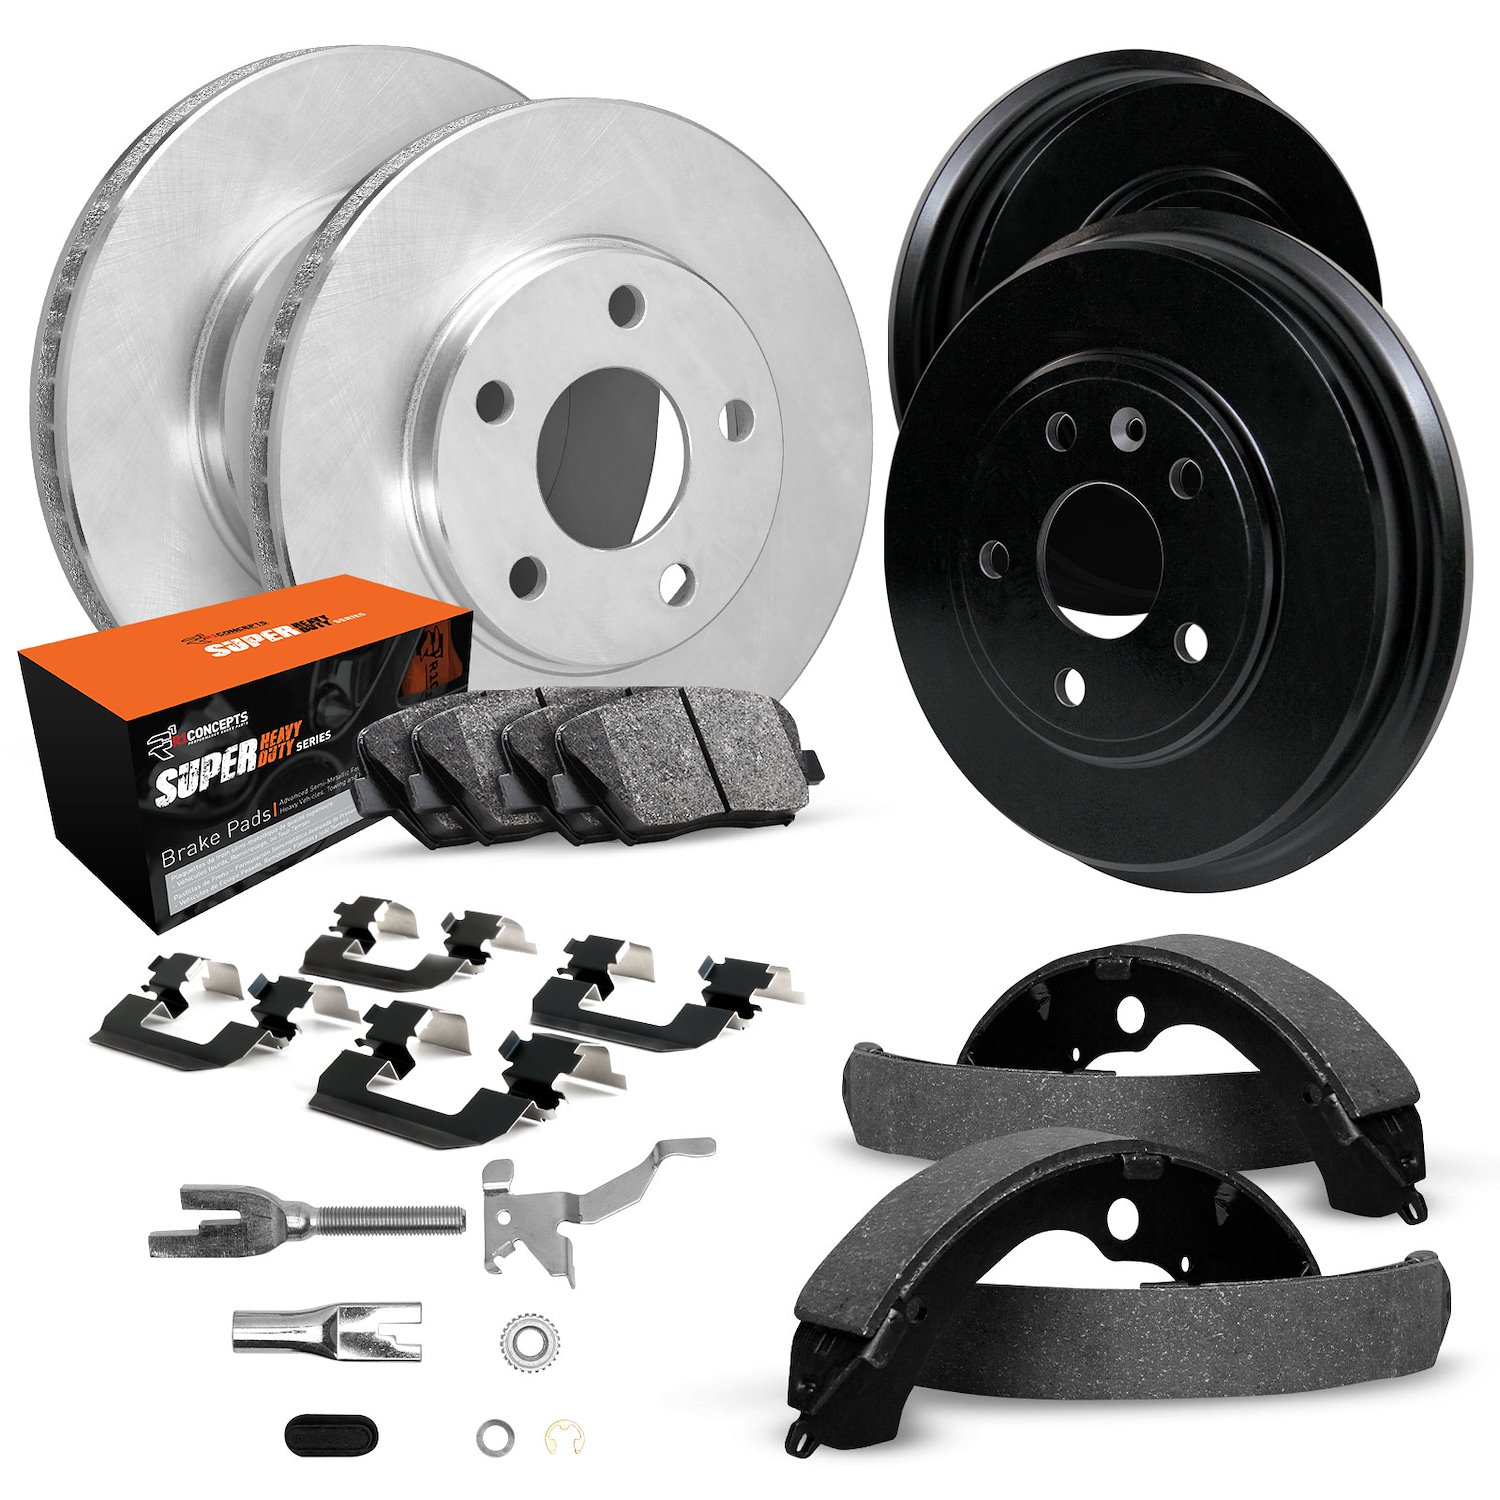 E-Line Blank Brake Rotor & Drum Set w/Super-Duty Pads, Shoes, Hardware, & Adjusters, 1975-1979 Ford/Lincoln/Mercury/Mazda